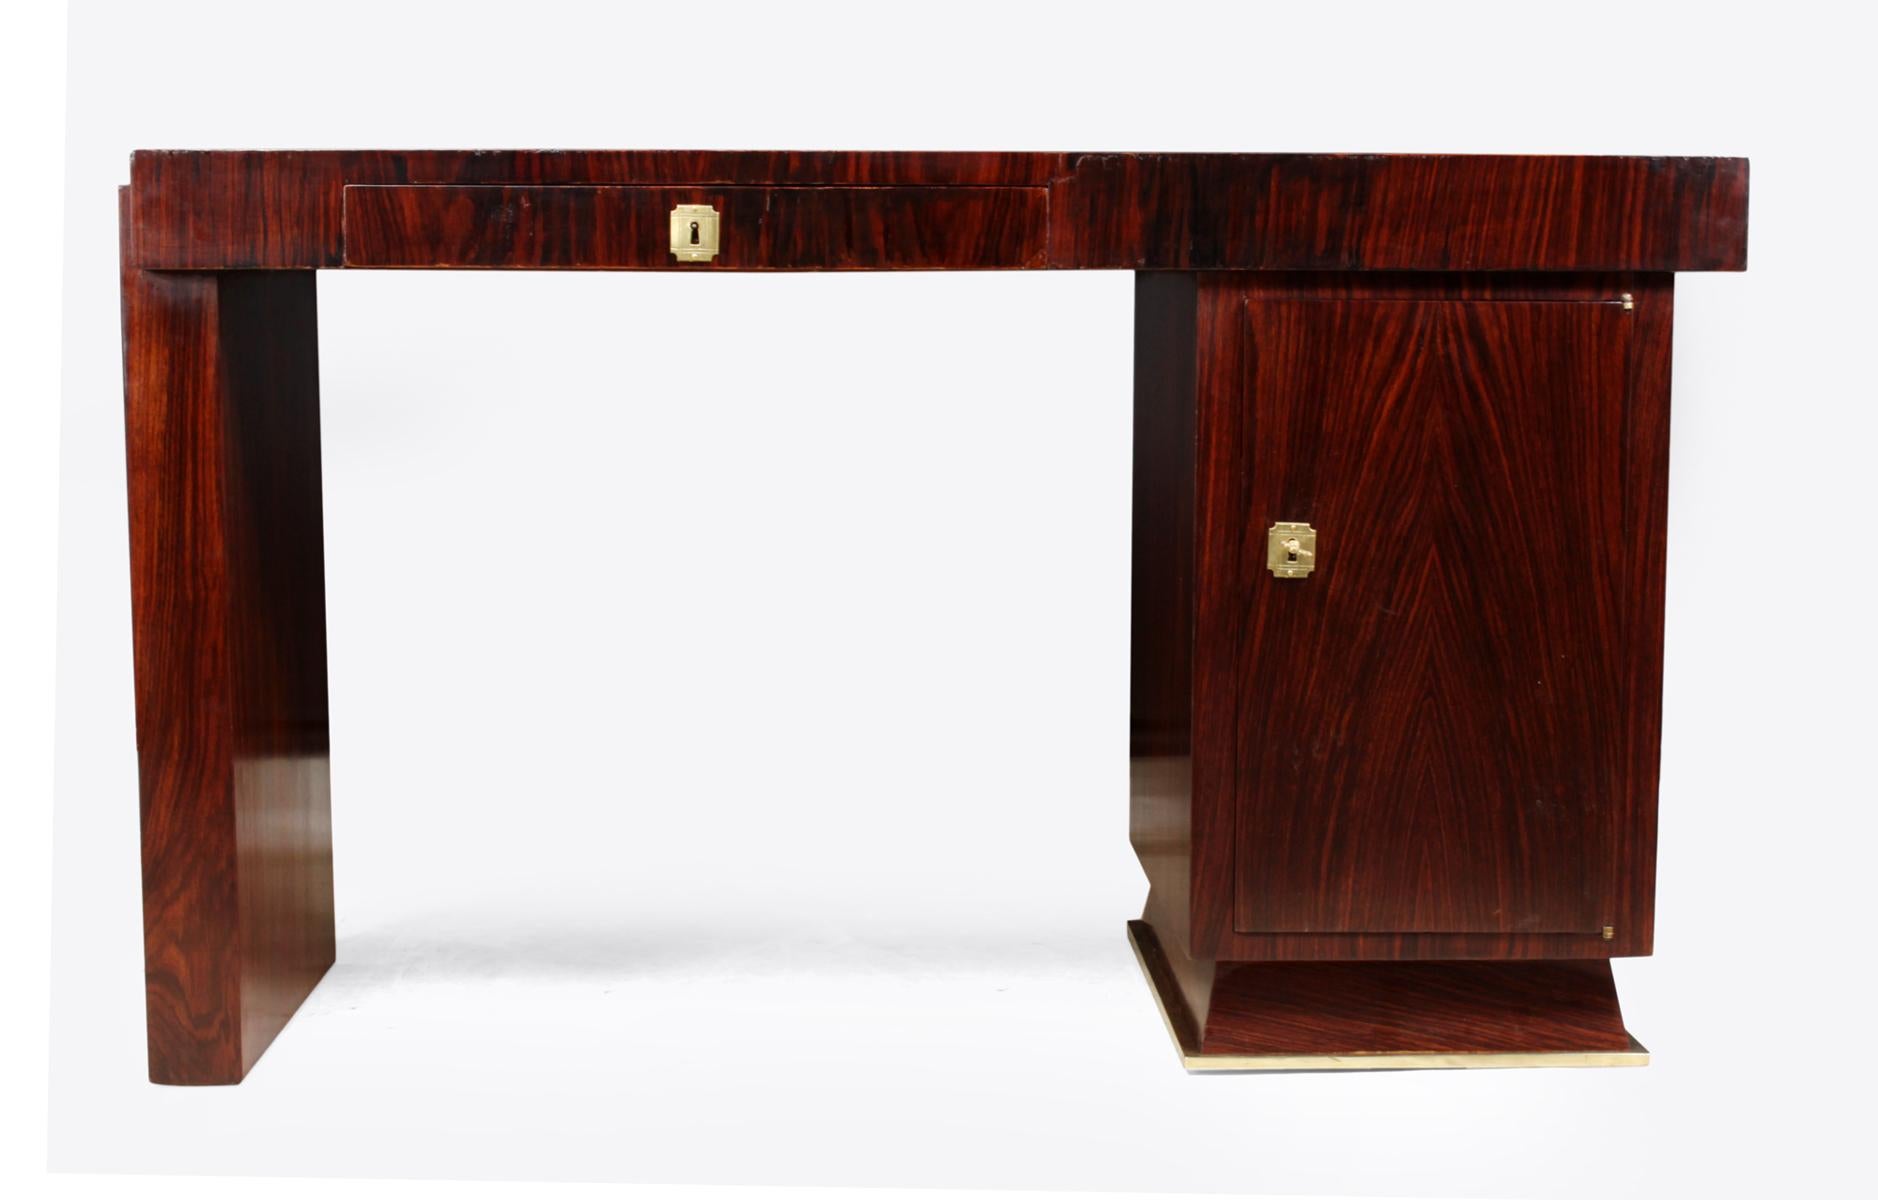 Art Deco desk in rosewood
A French Art Deco desk in rosewood with one sided pedestal and top drawer, behind the right hand door are slides, the desk has been full restored and hand polished

Age: 1930

Style: Art Deco

Material: